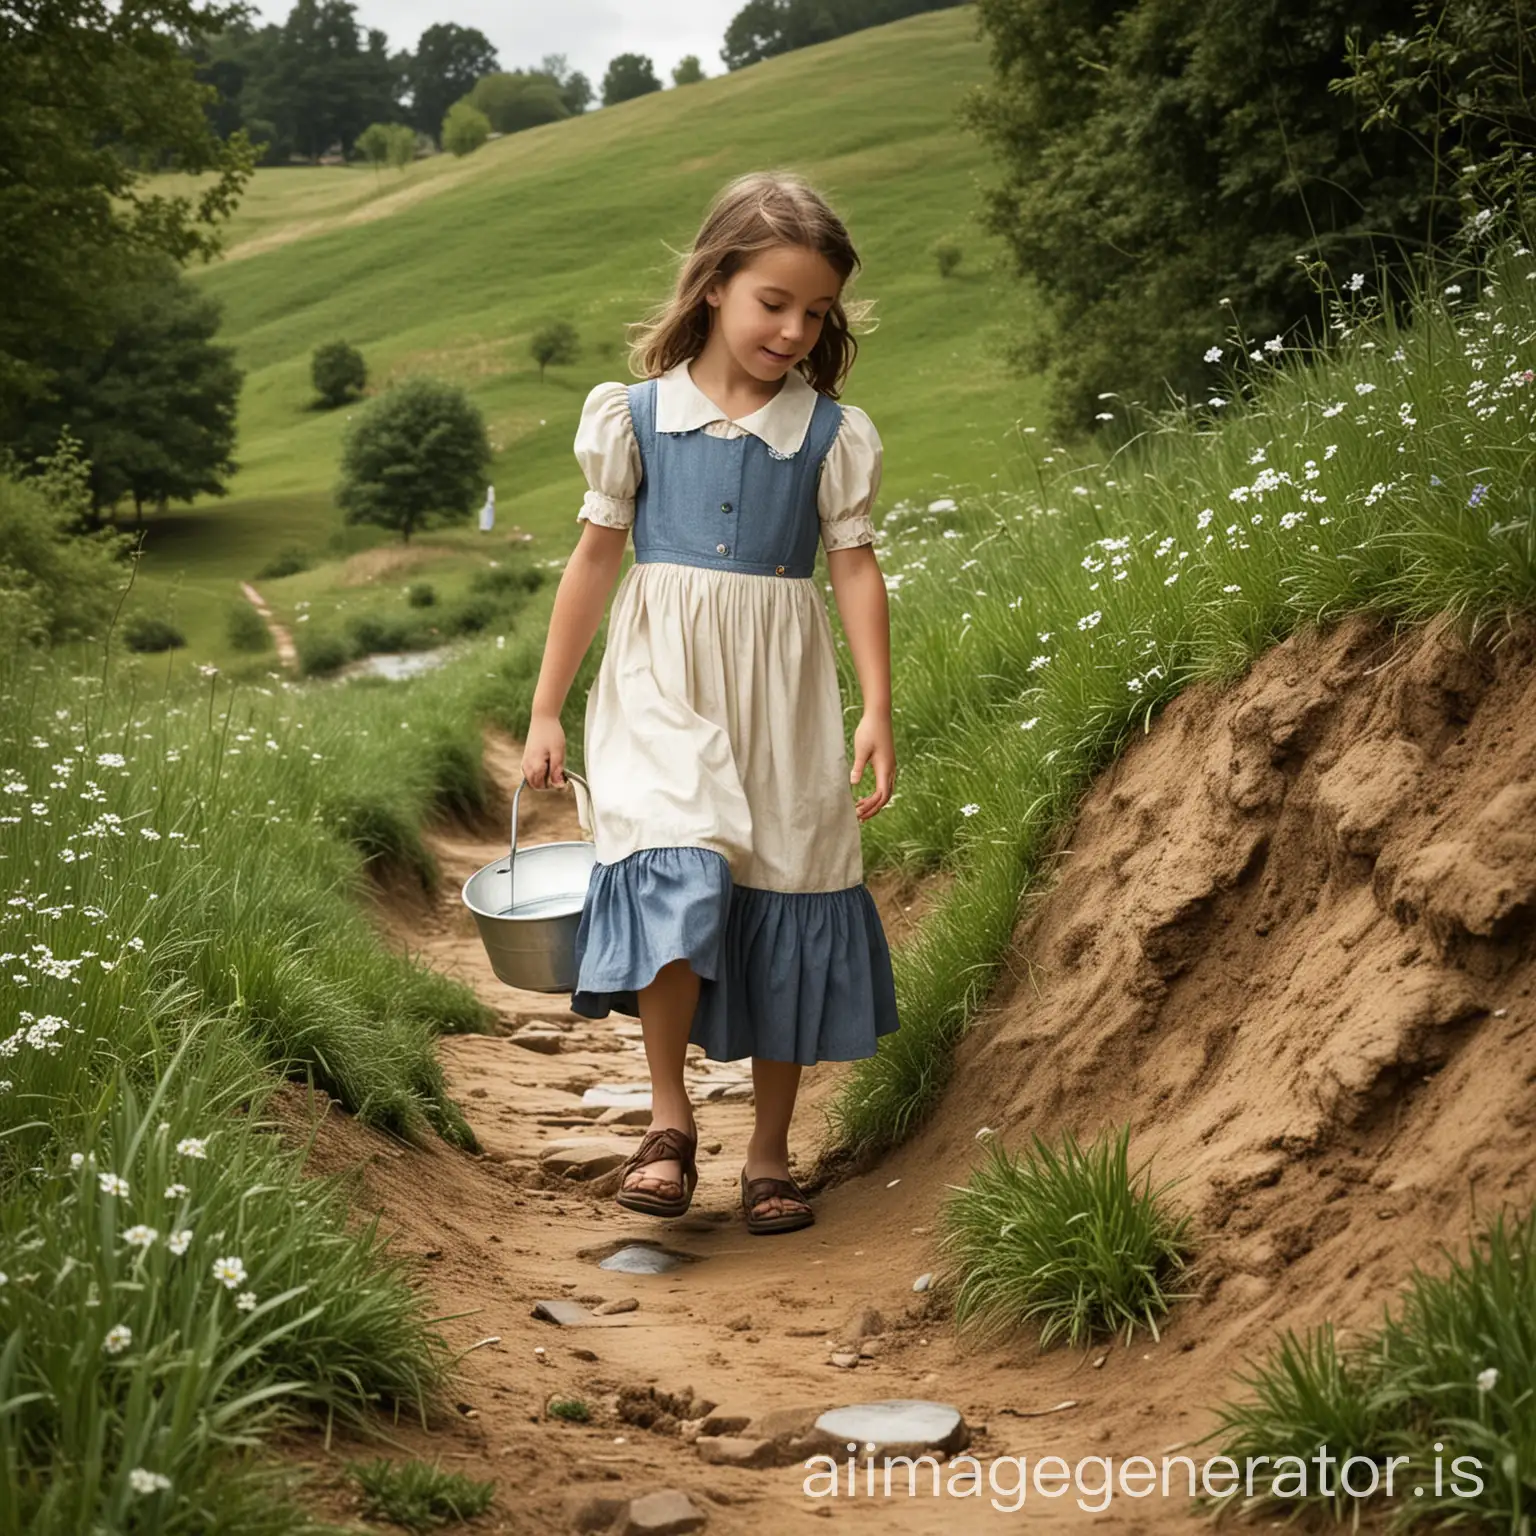 "Jack and Jill" is a traditional English nursery rhyme .Jack and Jill went up the hill
To fetch a pail of water.